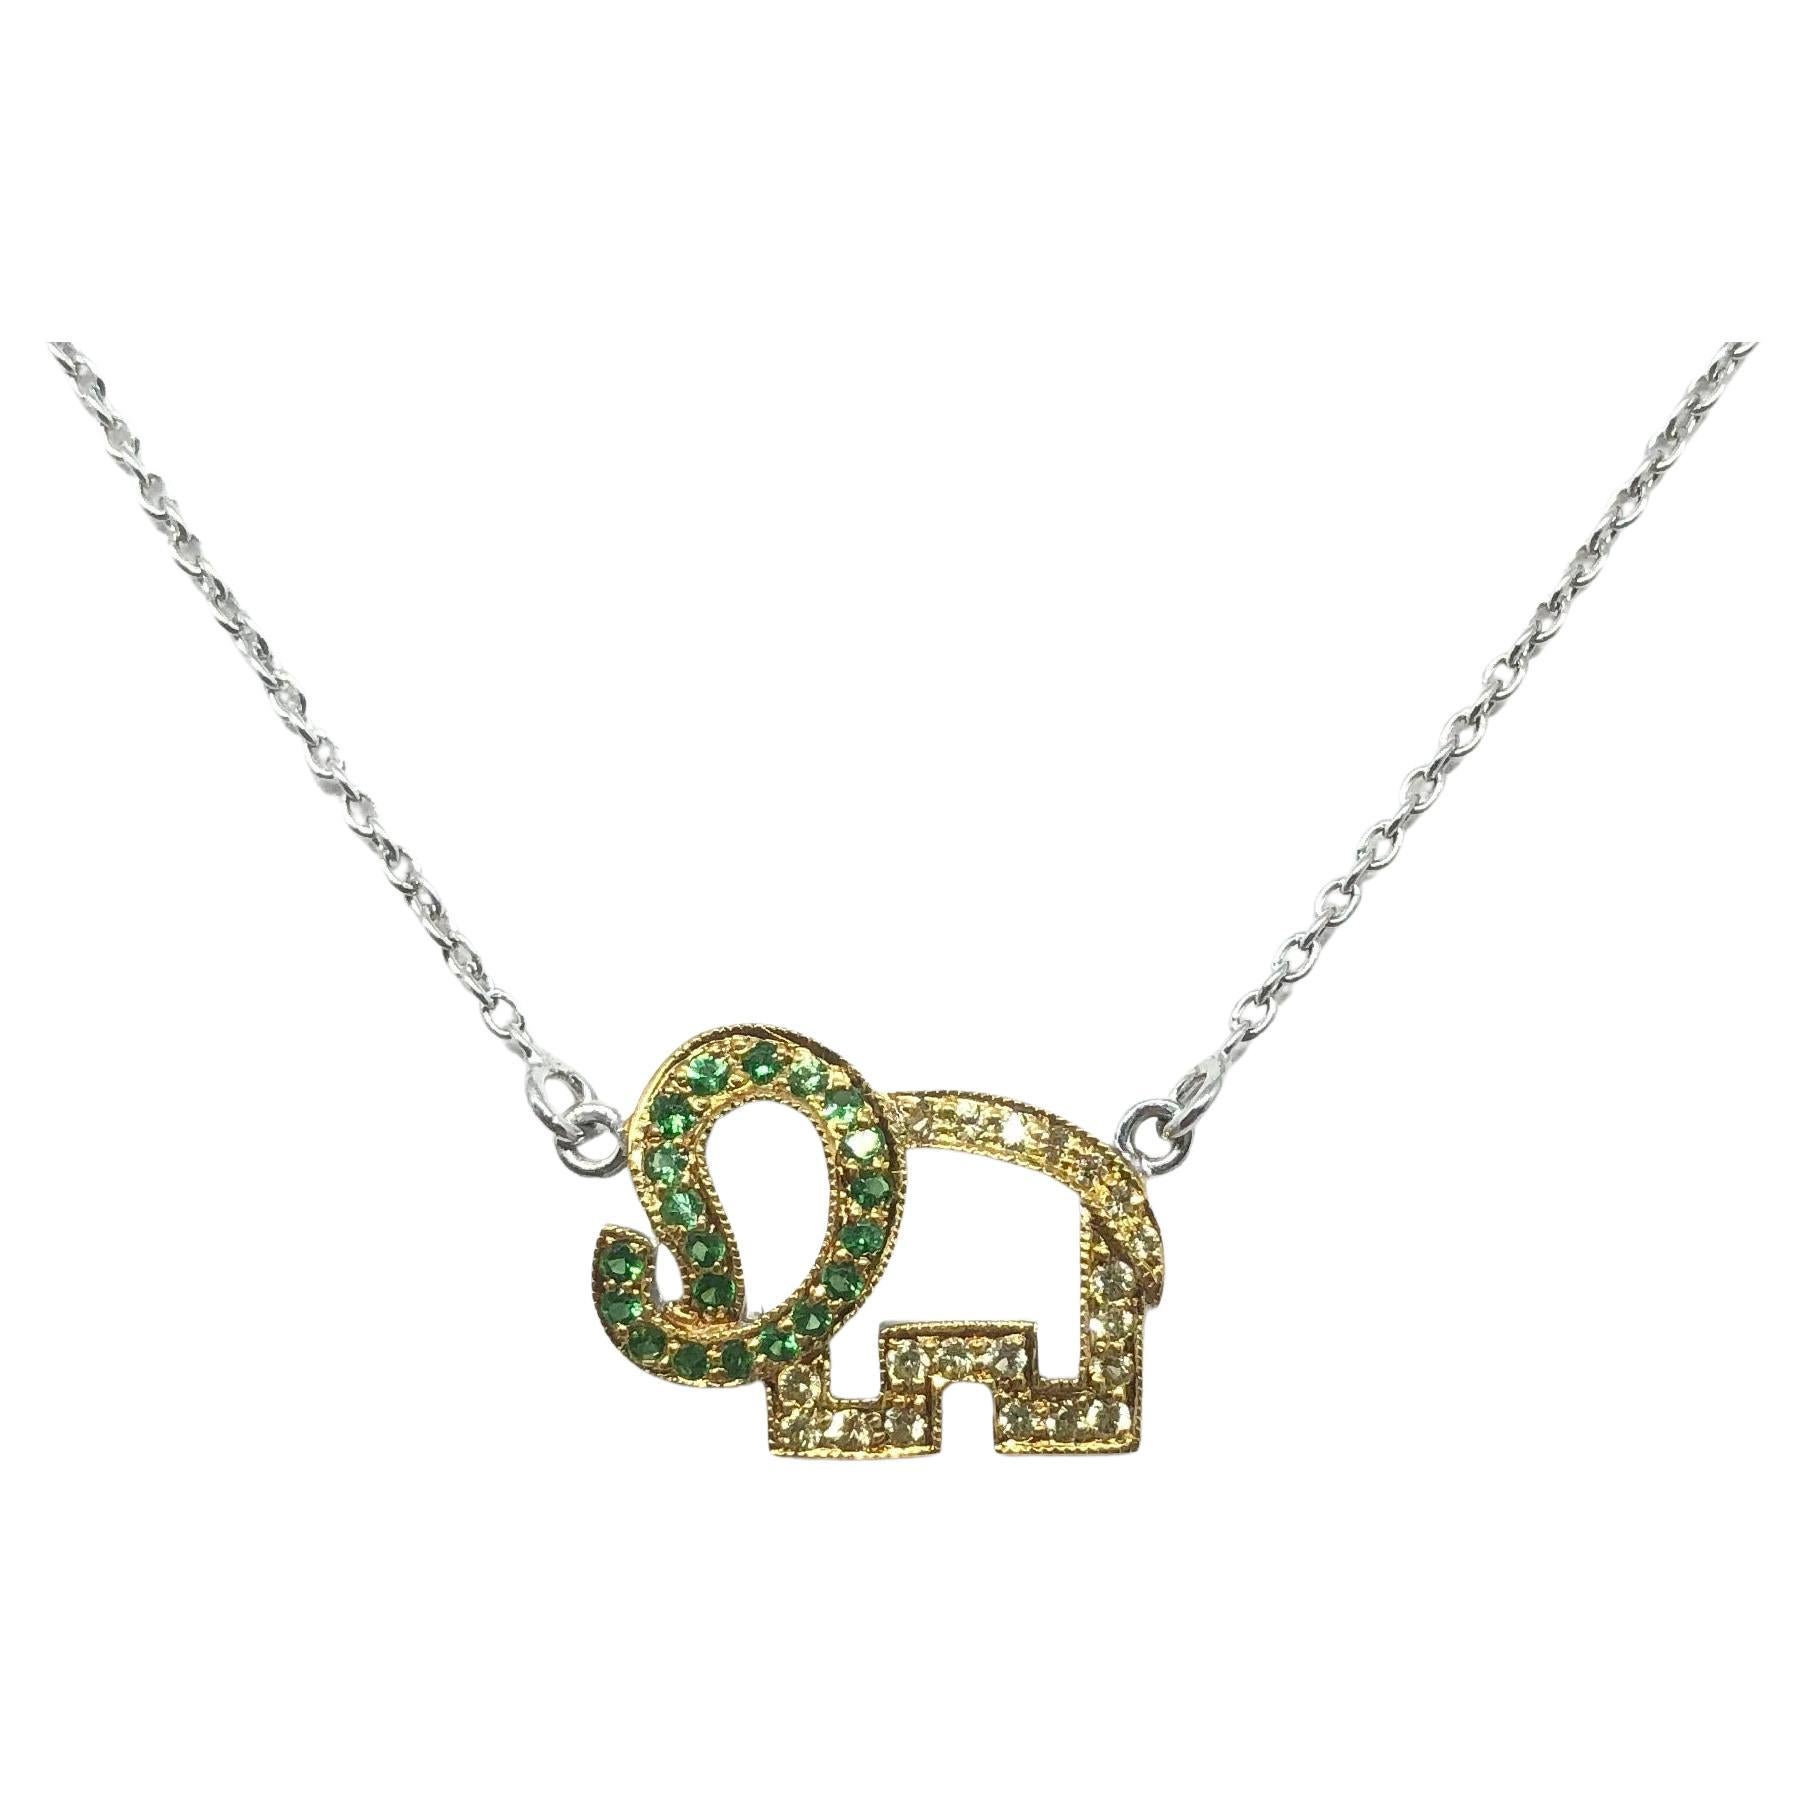 Tsavorite and Yellow Sapphire Elephant Necklace set in Silver Settings